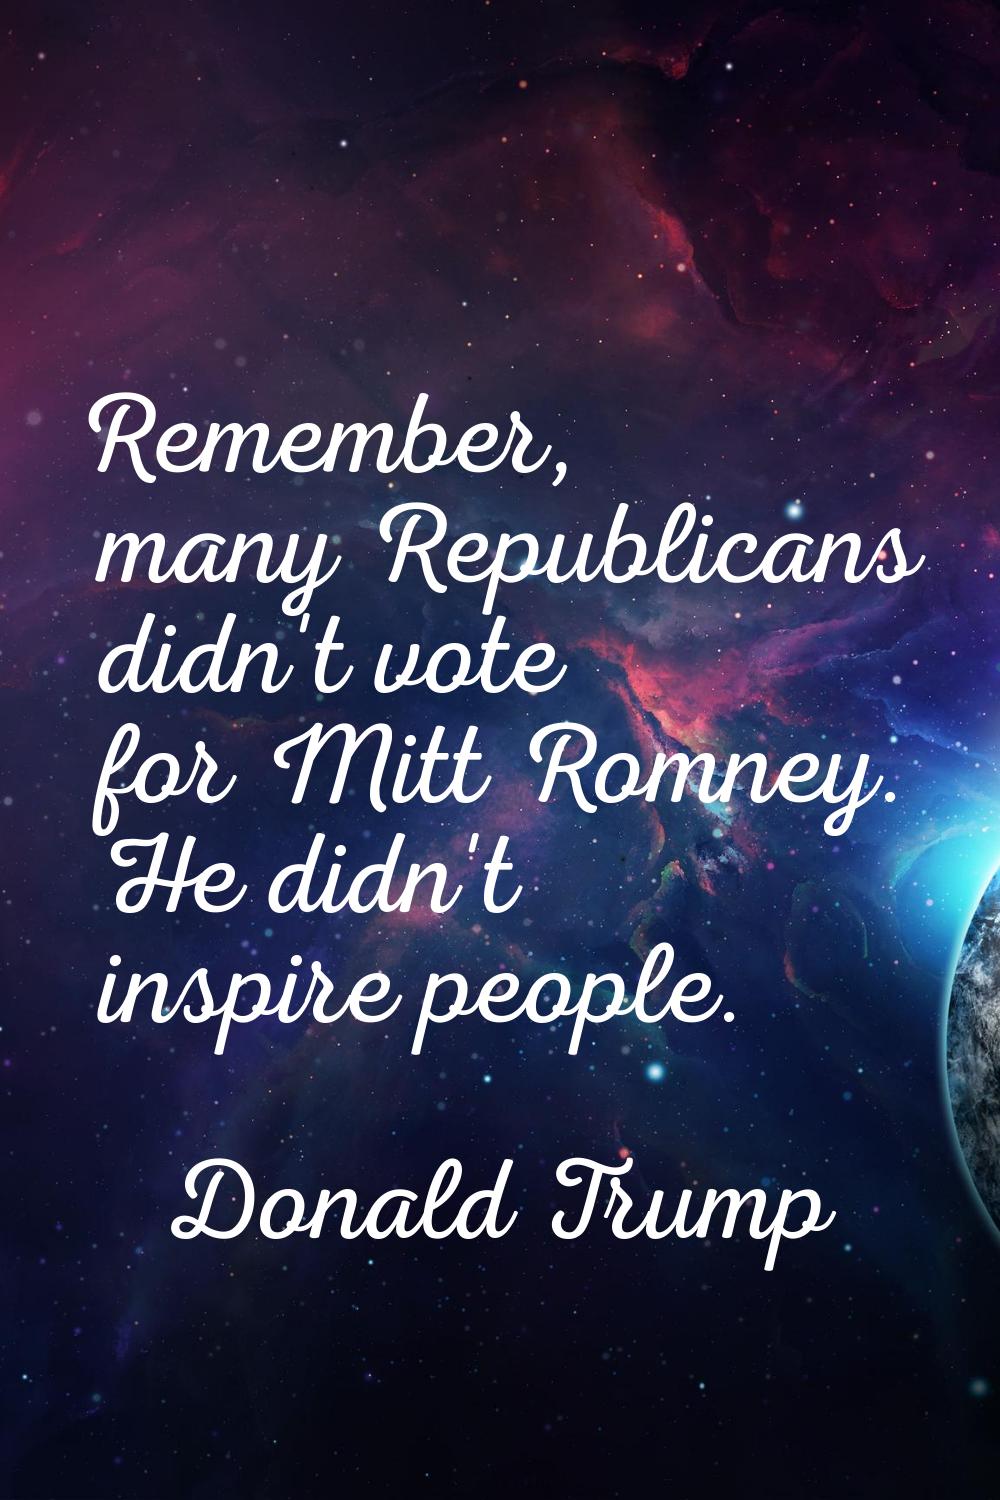 Remember, many Republicans didn't vote for Mitt Romney. He didn't inspire people.